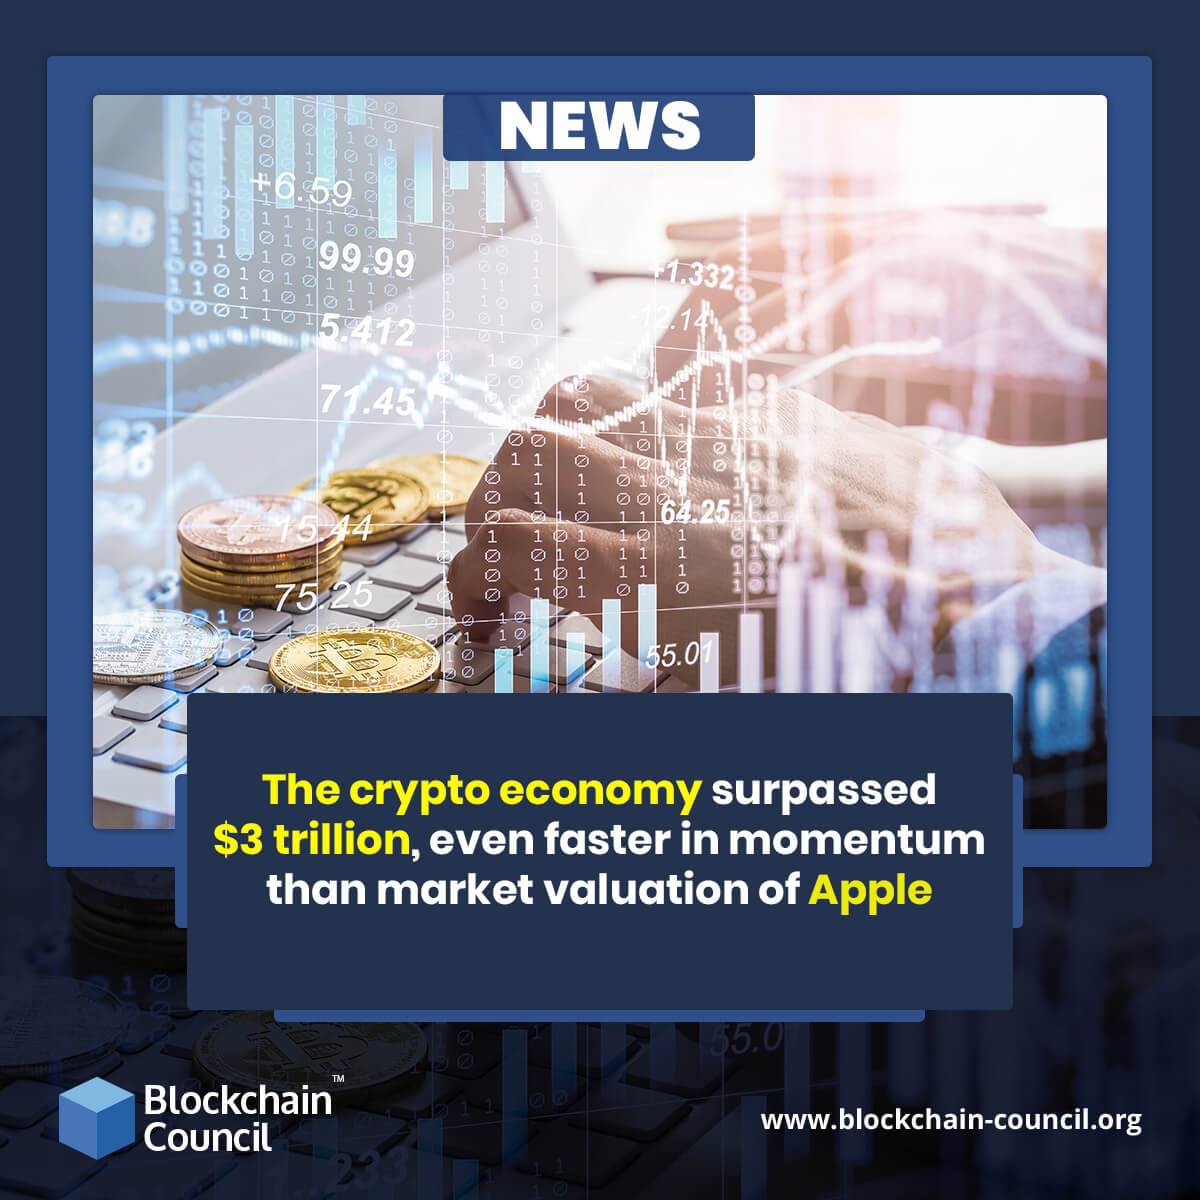 The crypto economy surpassed $3 trillion, even faster in momentum than market valuation of Apple